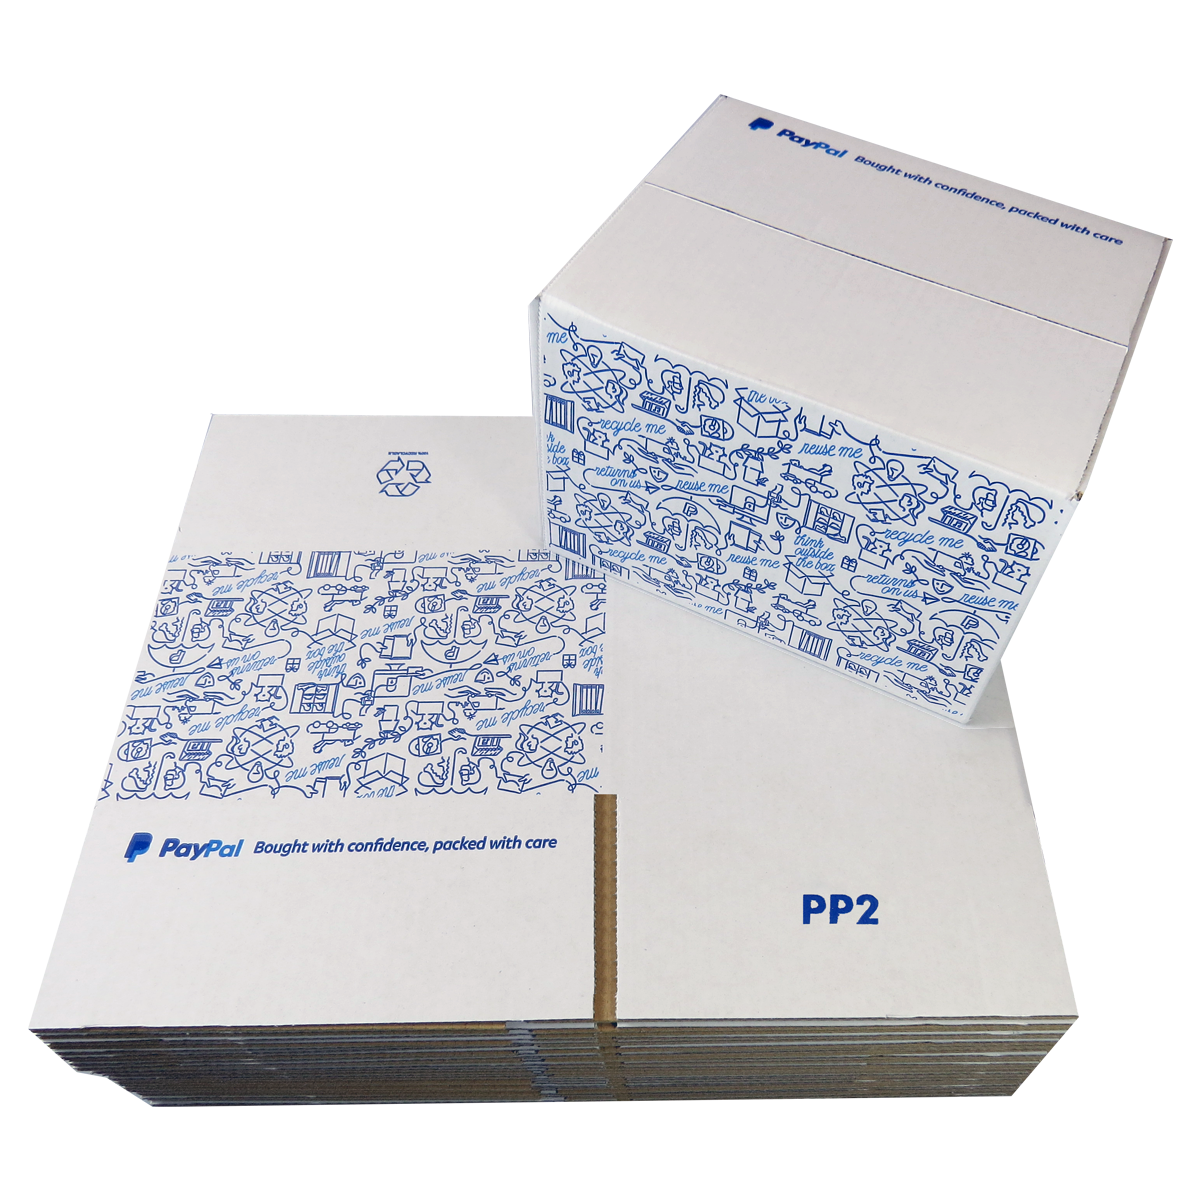 1000 x PP2 PayPal Branded Quality White Single Wall Cardboard Postal Mailing Boxes 215x180x135mm